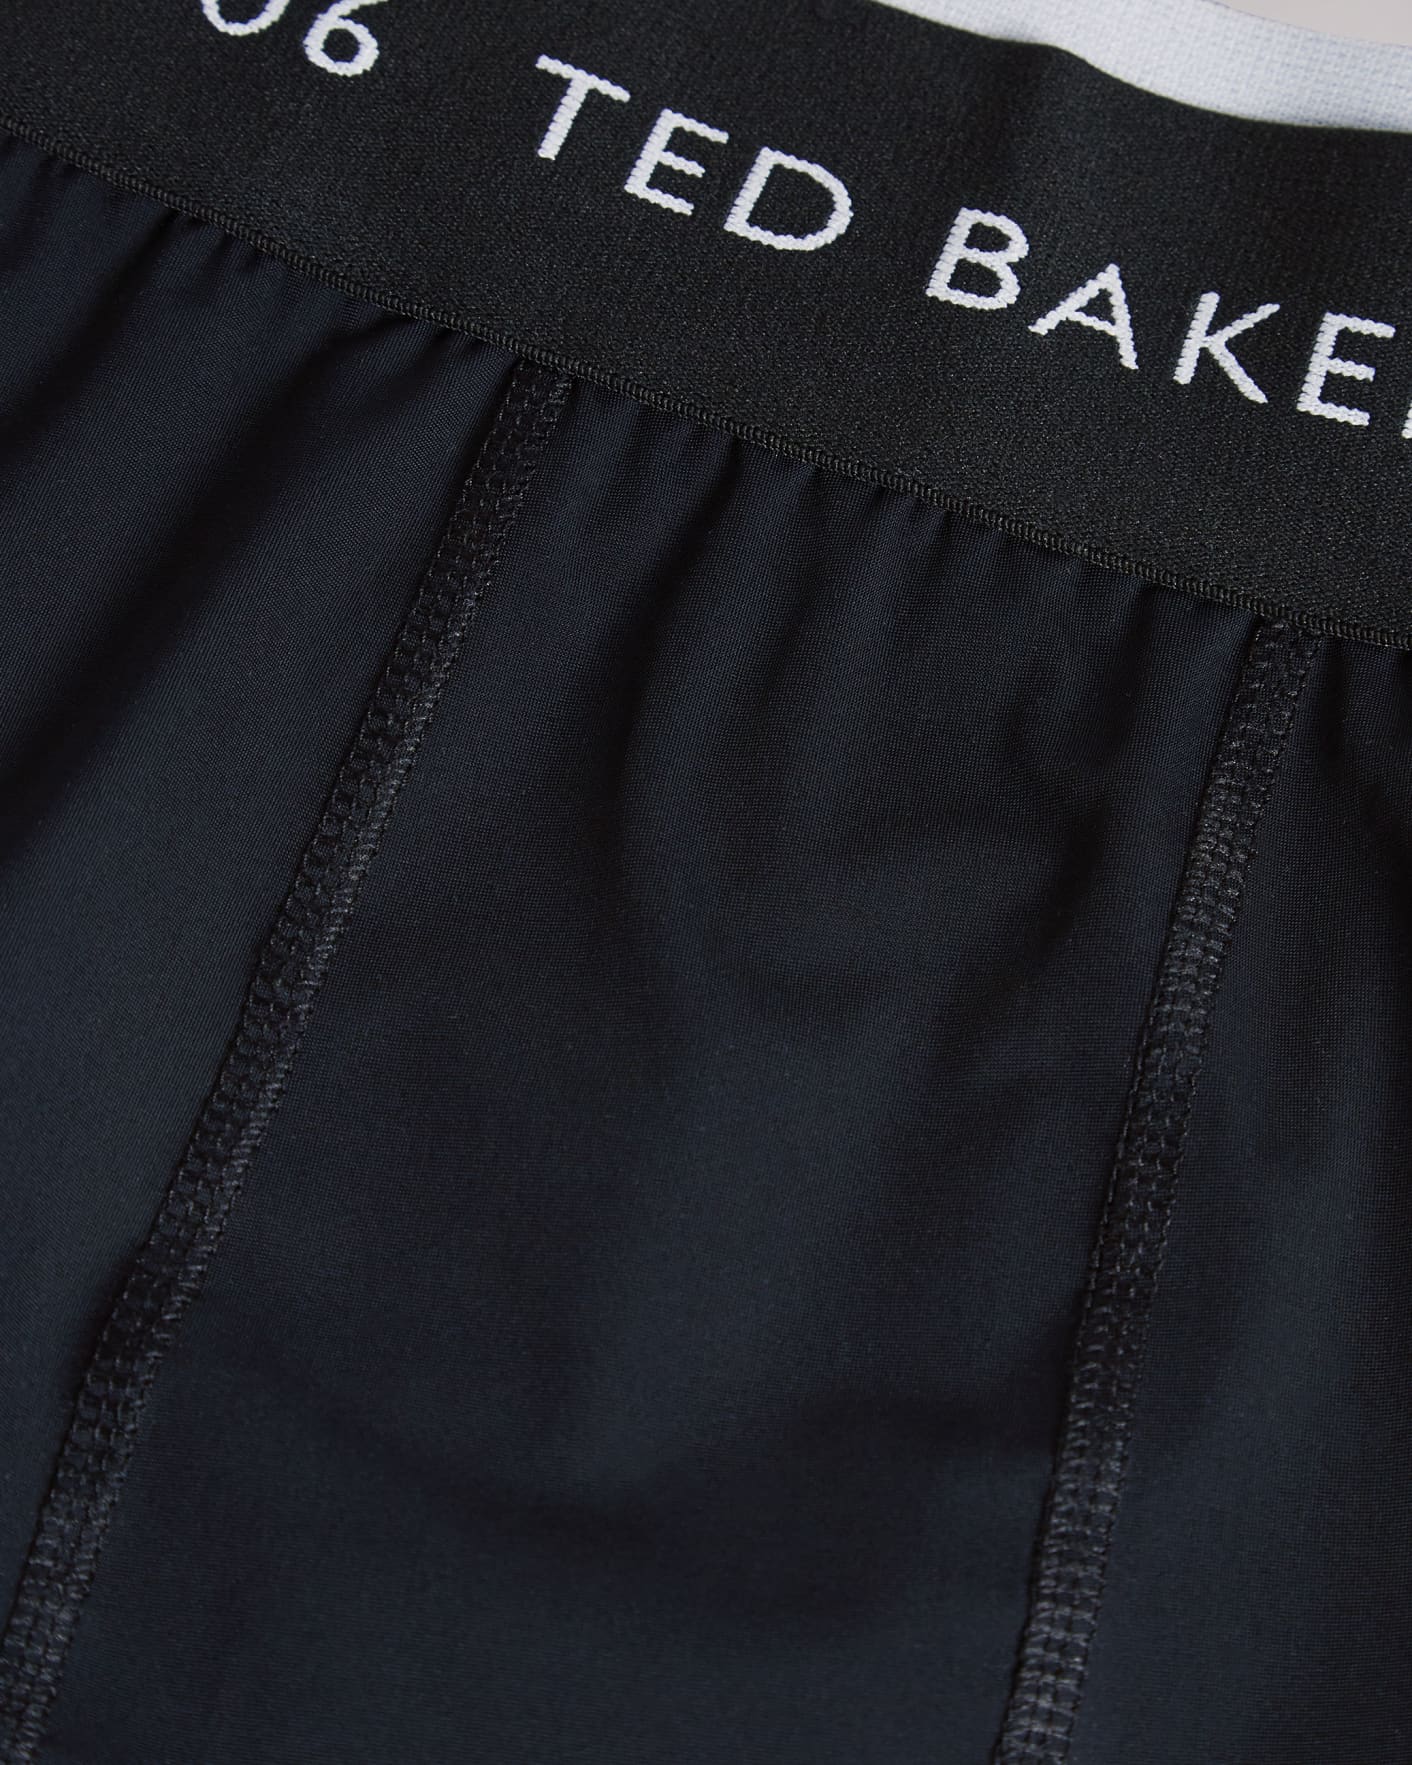 Black Branded Cycling Shorts Ted Baker